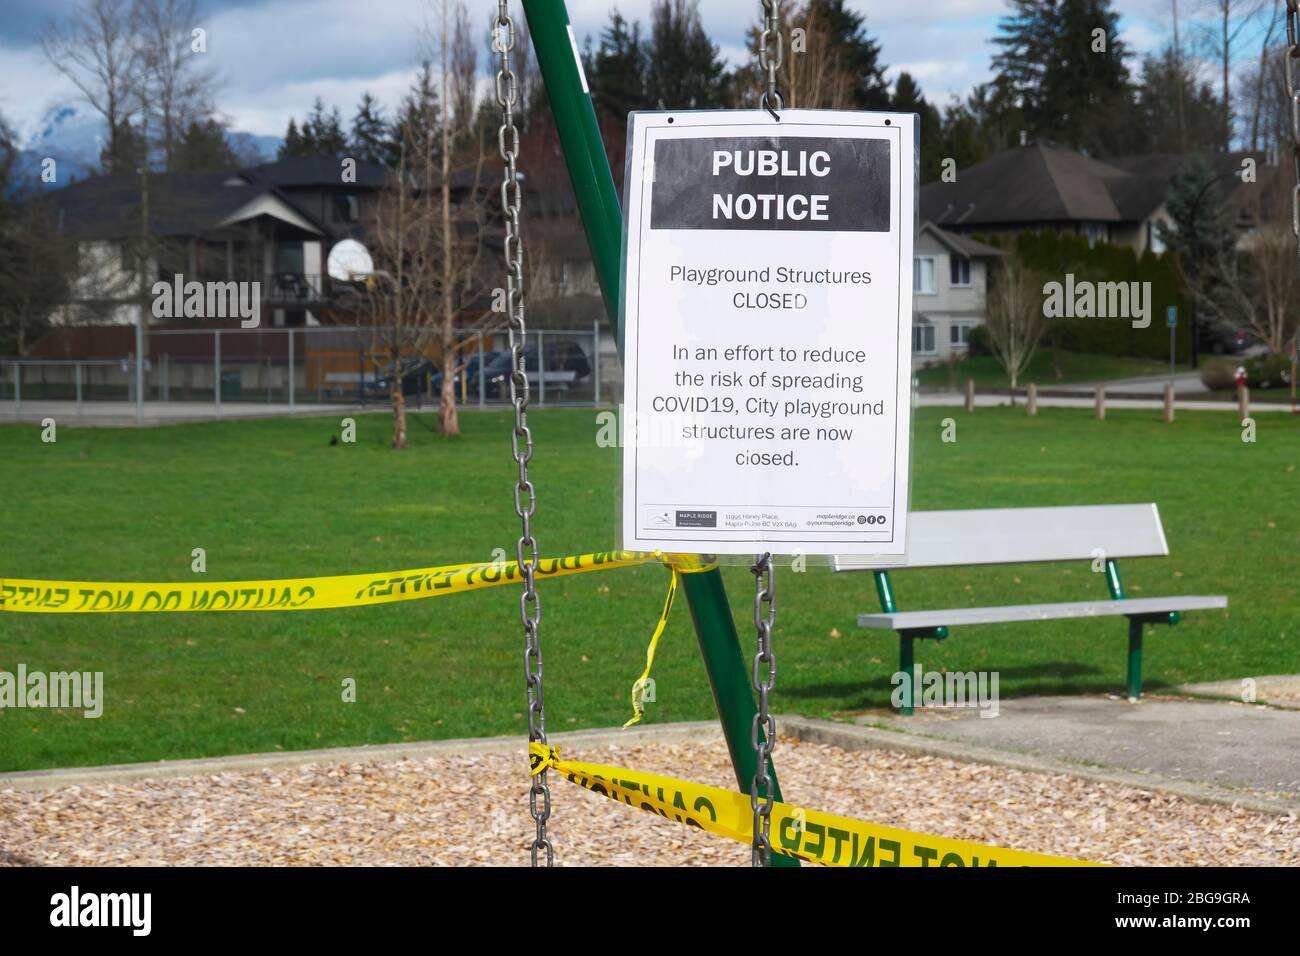 Public Notice Sign Posted in a Playground Advising of Playground Structures Closure During Covid19 Pandemic. Stock Photo